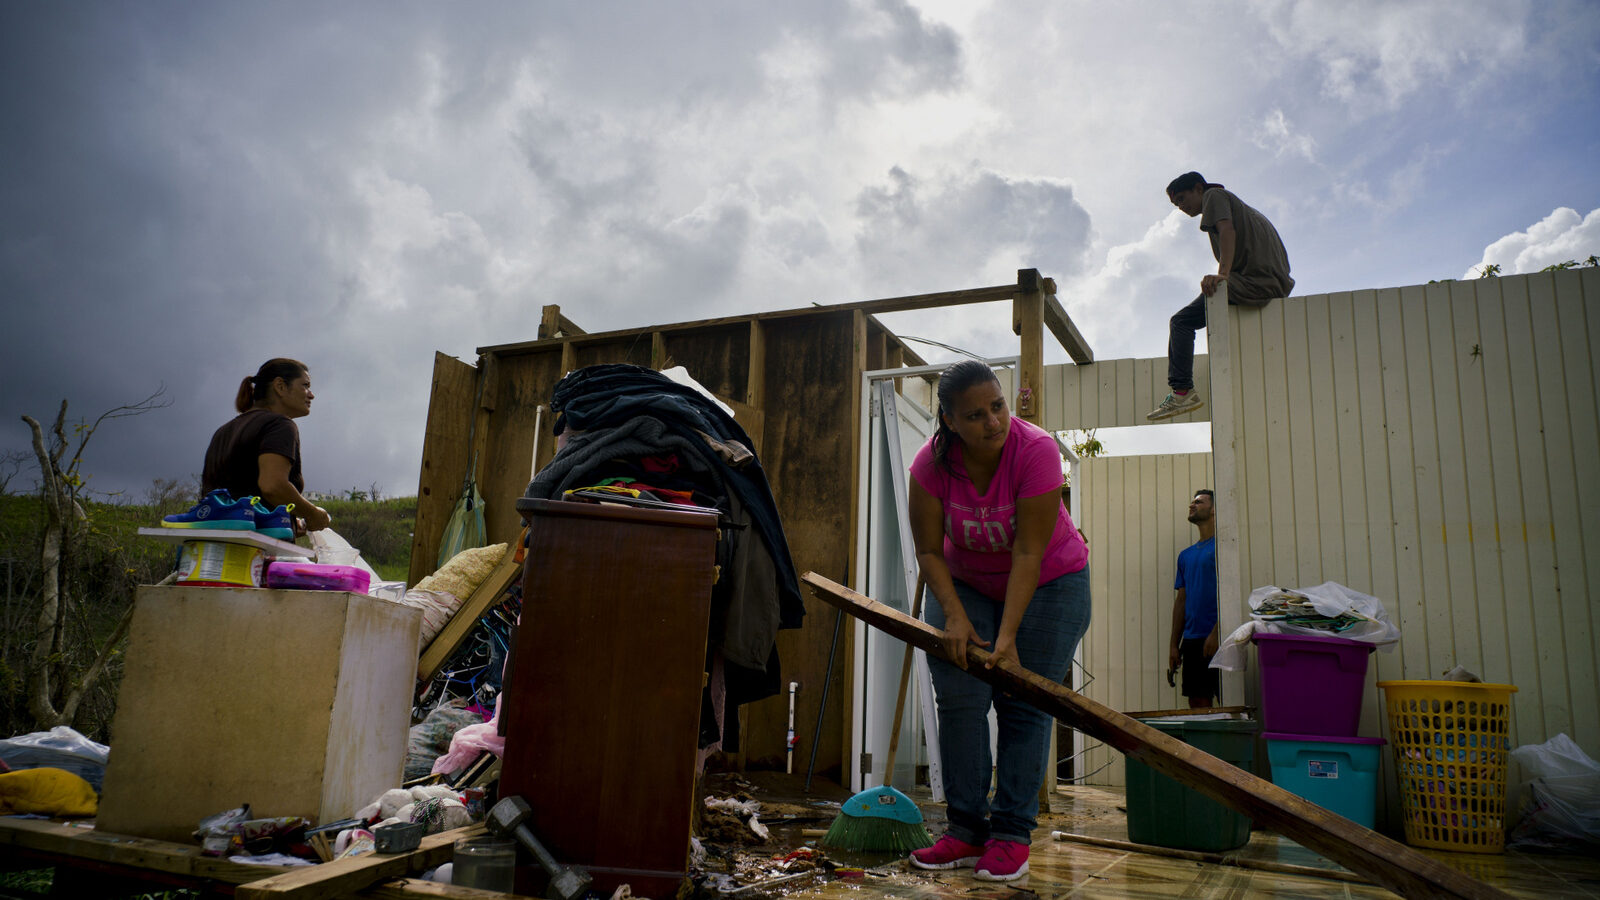 People try to recover their belongings and start rebuilding their house that was destroyed by Hurricane Maria, in Morovis, Puerto Rico, Saturday, Oct. 14, 2017. (AP Photo/Ramon Espinosa)